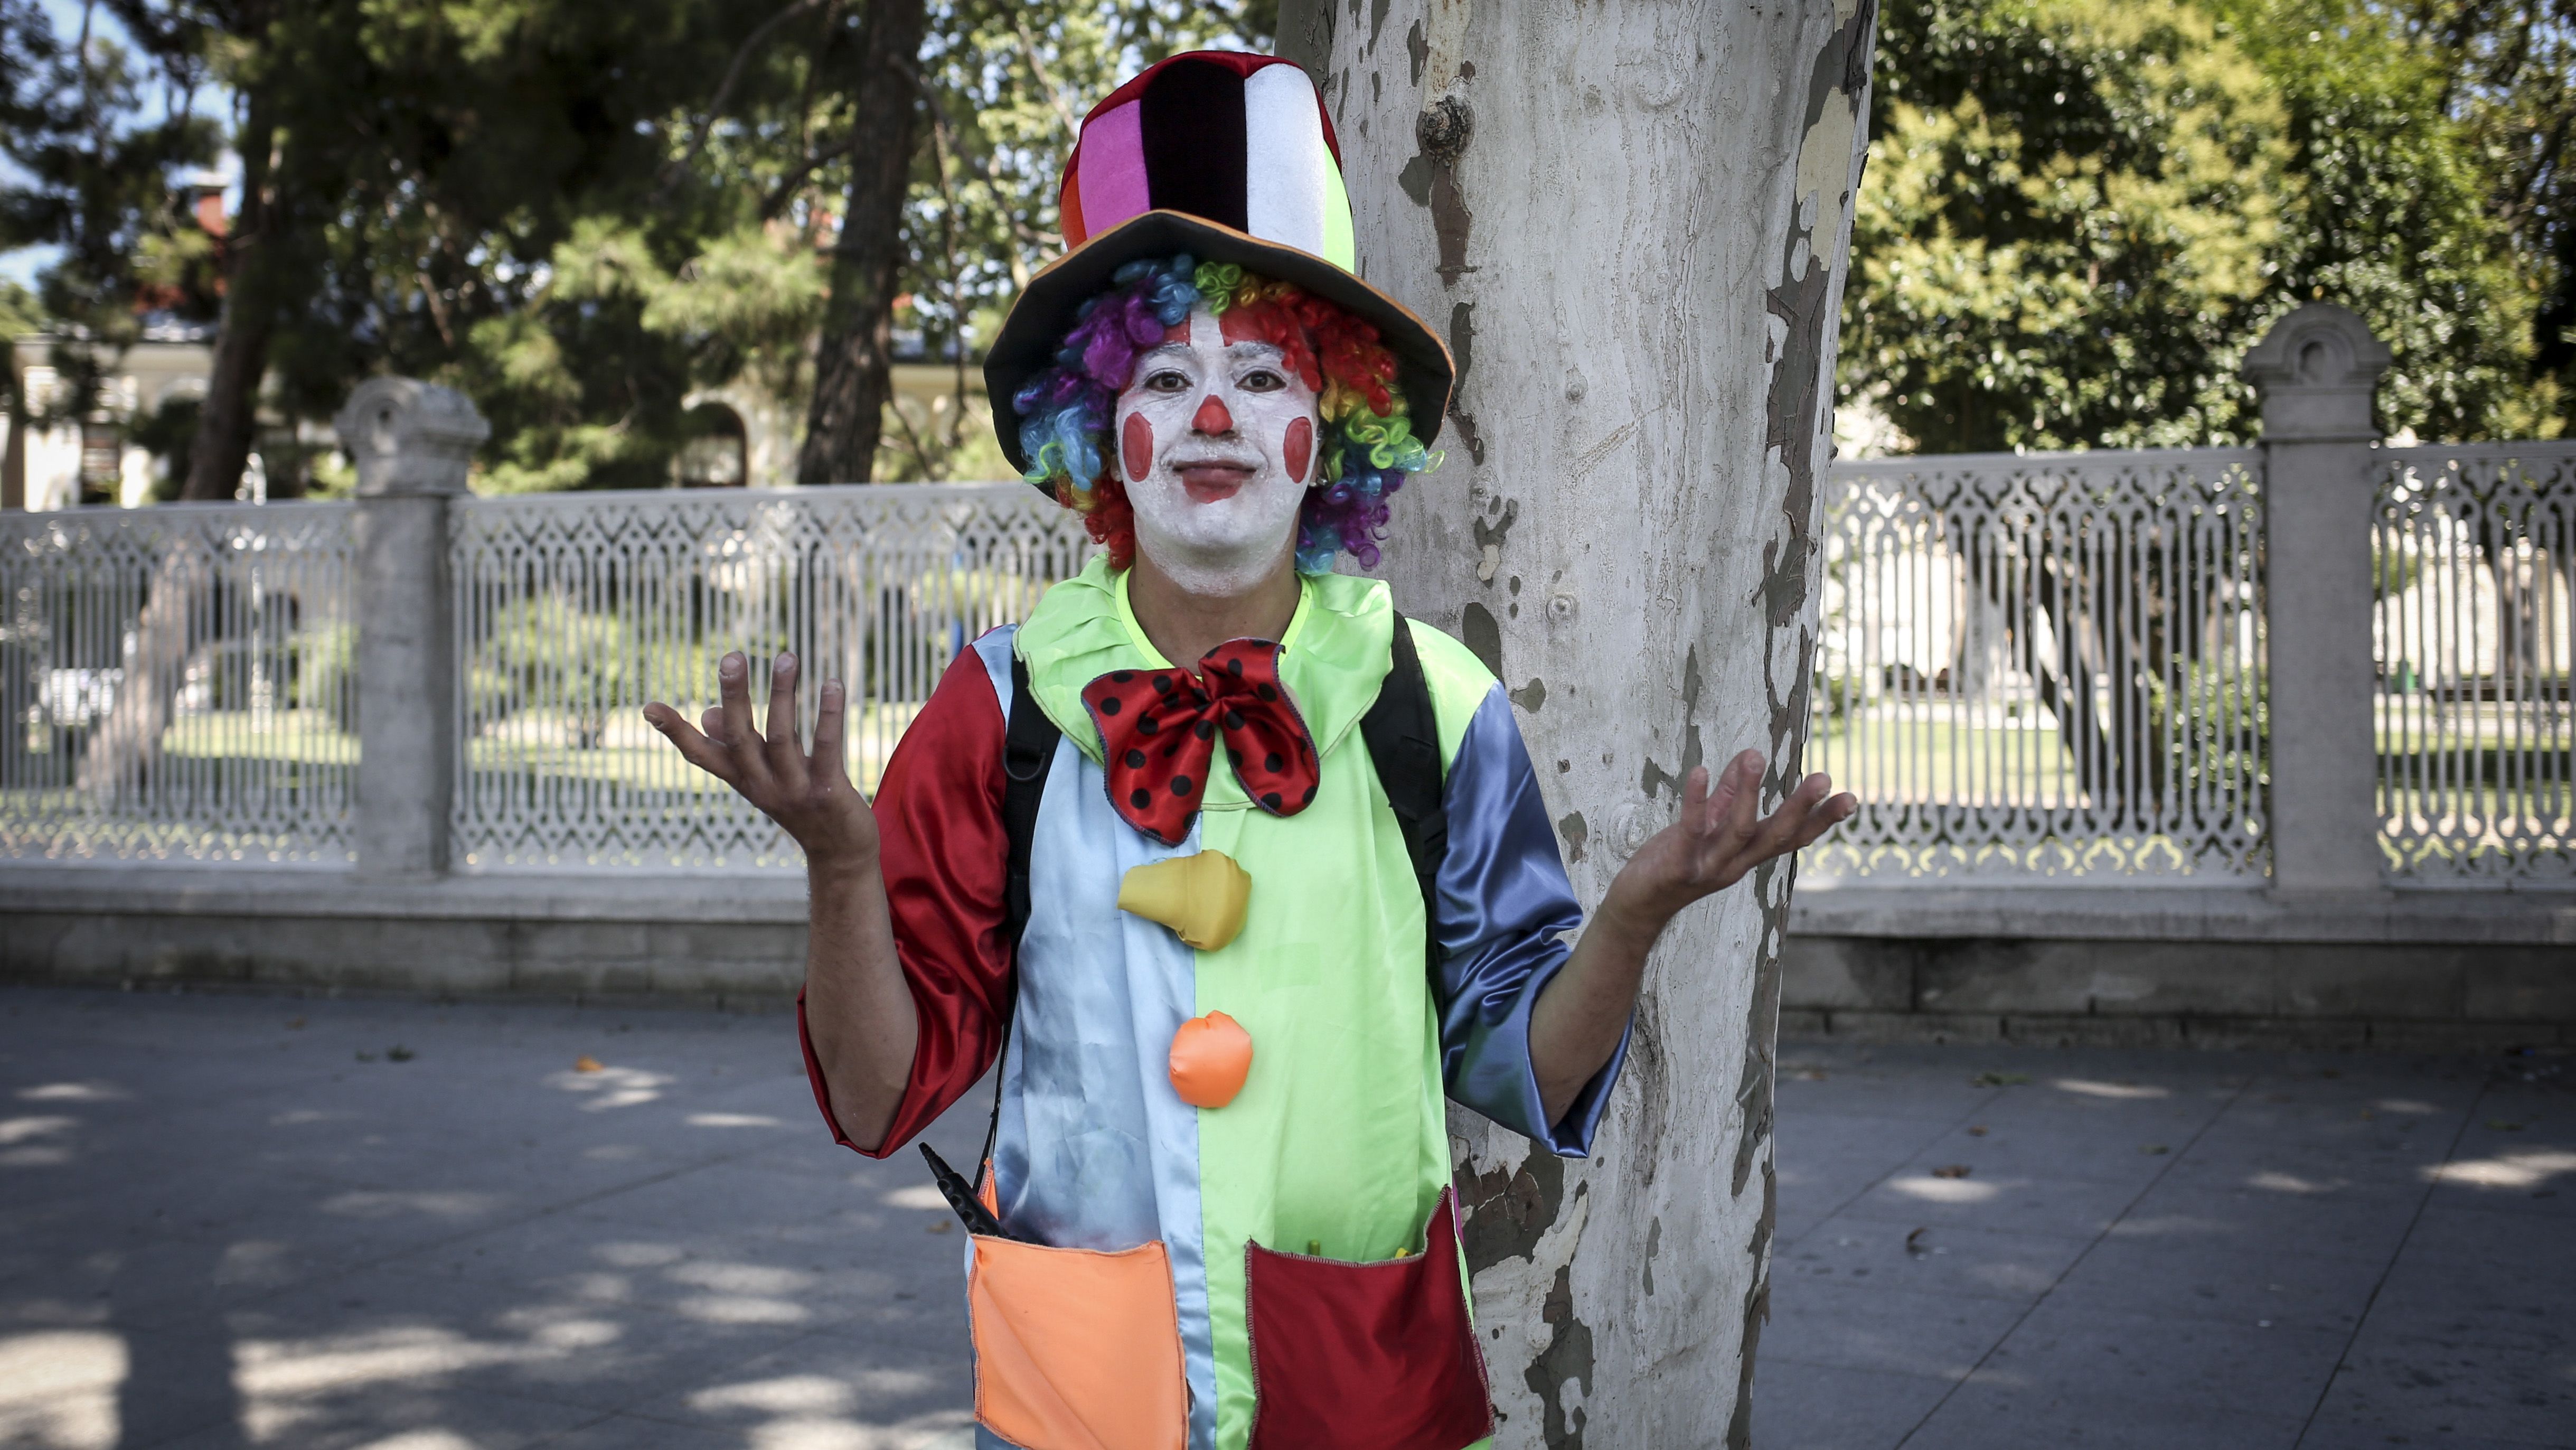 Tolga, a professional clown, poses for a photo, in Istanbul.